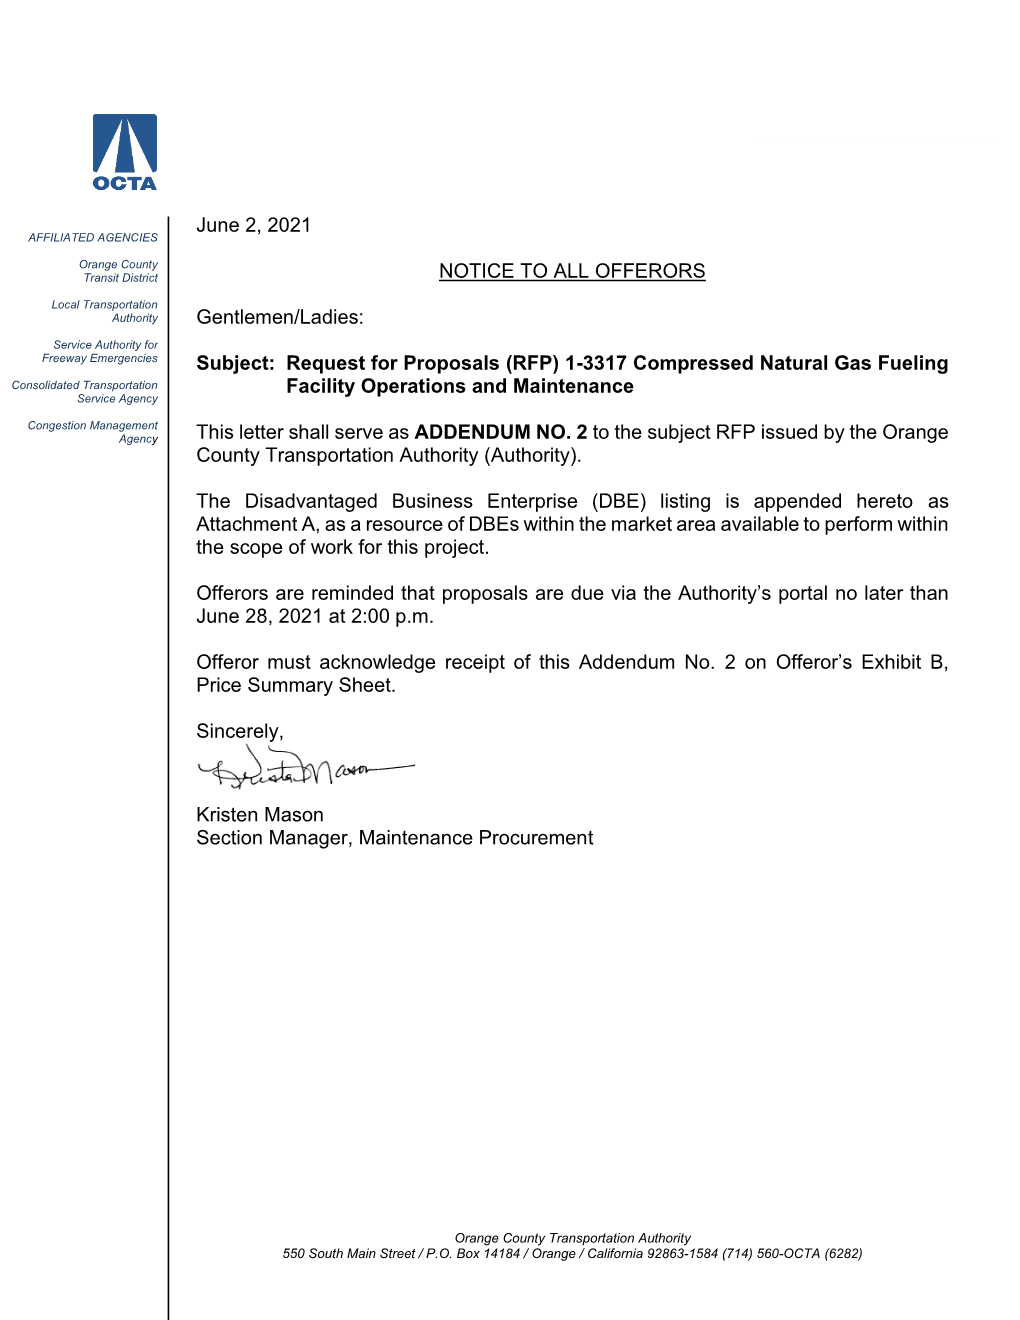 Subject: Request for Proposals (RFP) 1-3317 Compressed Natural Gas Fueling Consolidated Transportation Facility Operations and Maintenance Service Agency